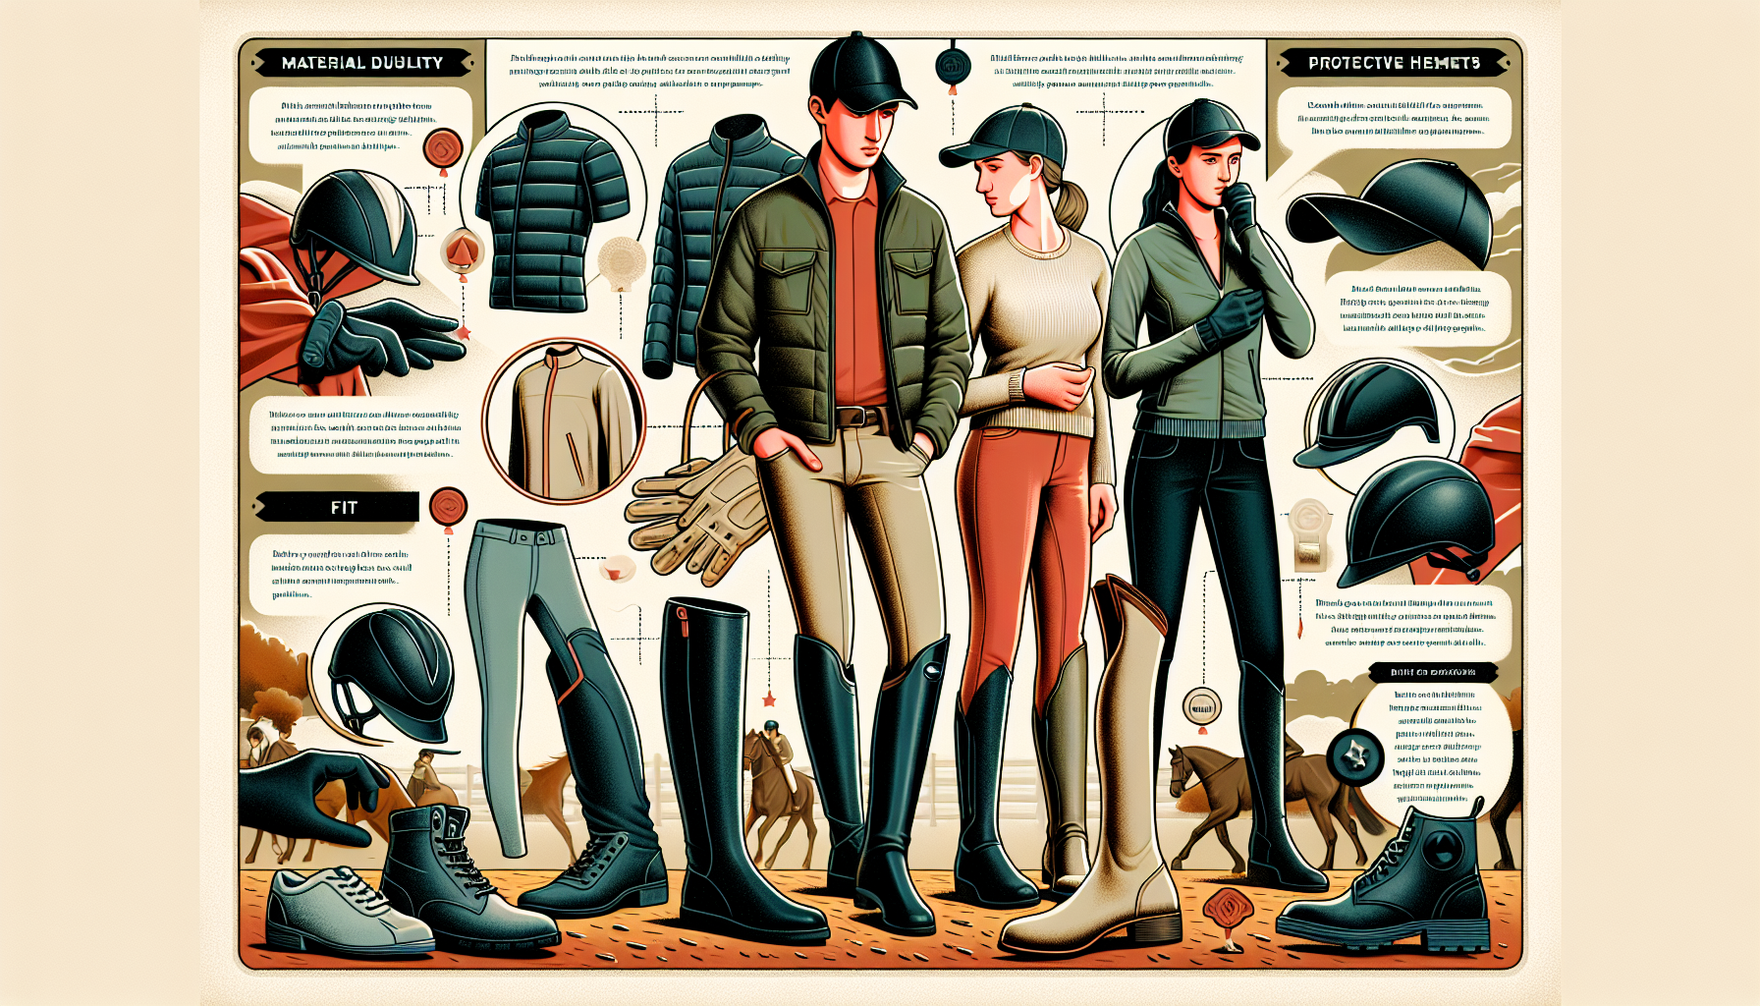 An image illustrating a guide on selecting durable equestrian apparel. The foreground showcases a variety of high-quality riding equipment such as sturdy boots, comfortable breeches, protective helmet